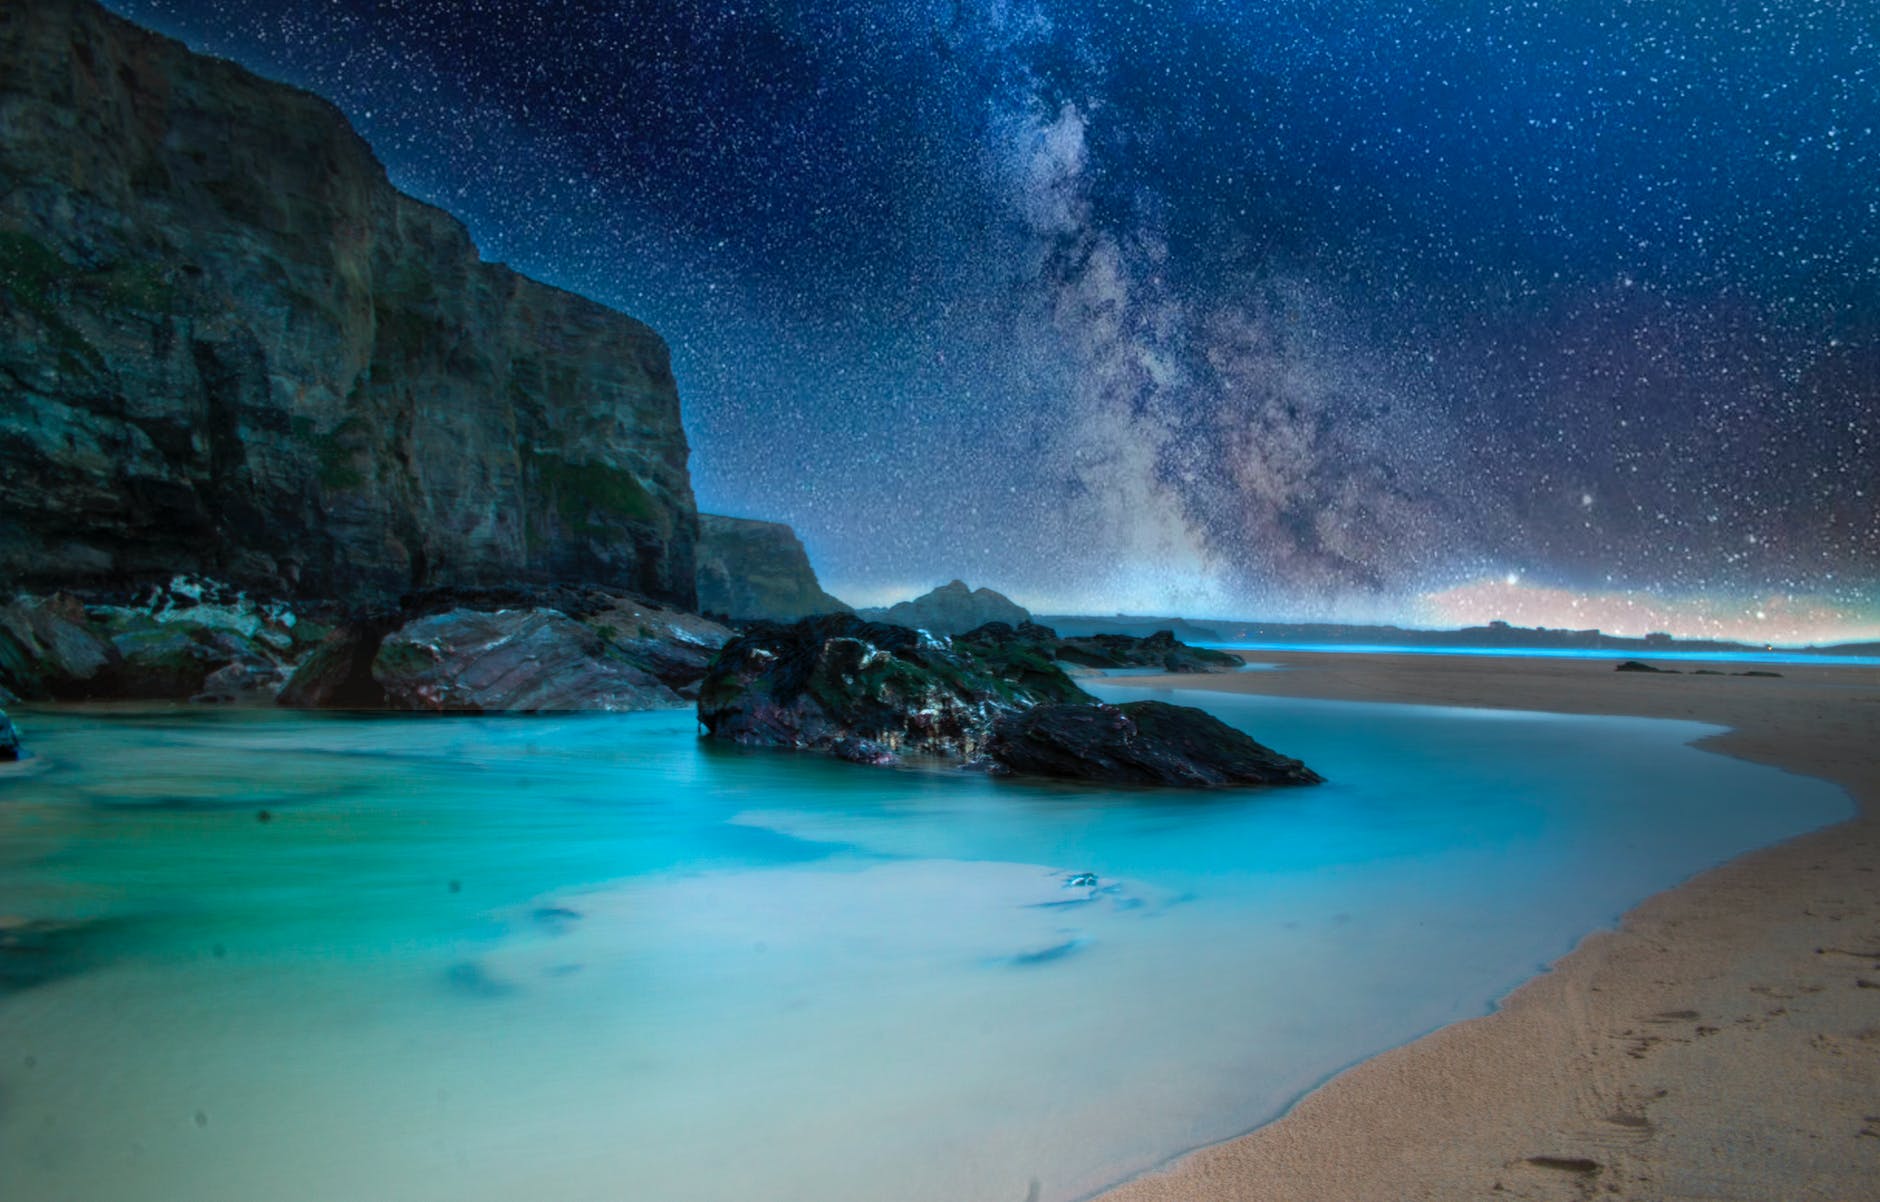 ocean with rock formation under starry night